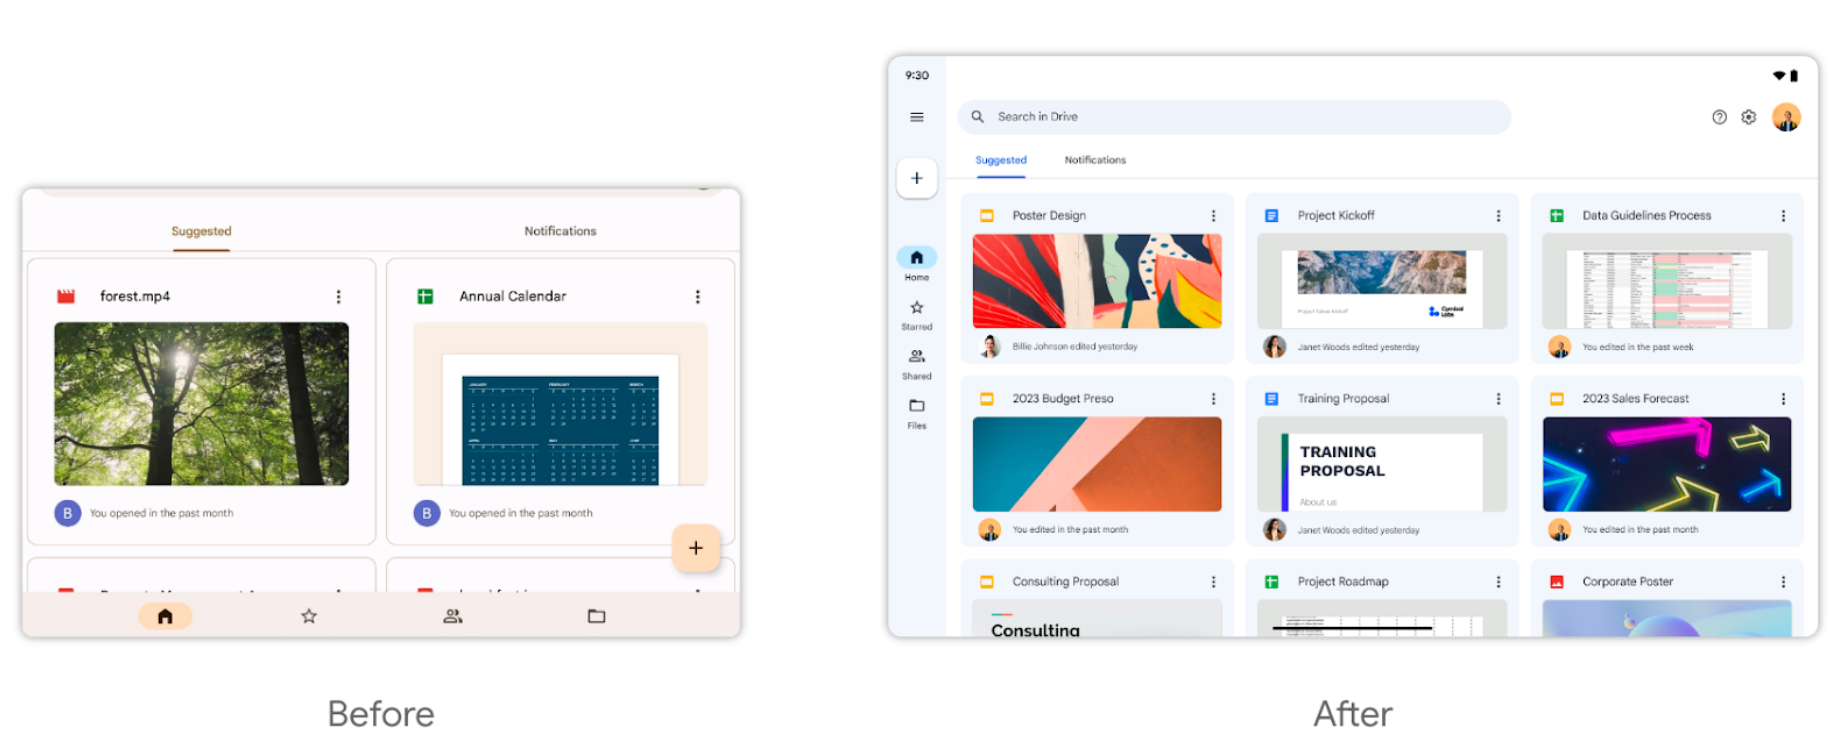 Enhancing the Google Drive mobile experience on Android tablets